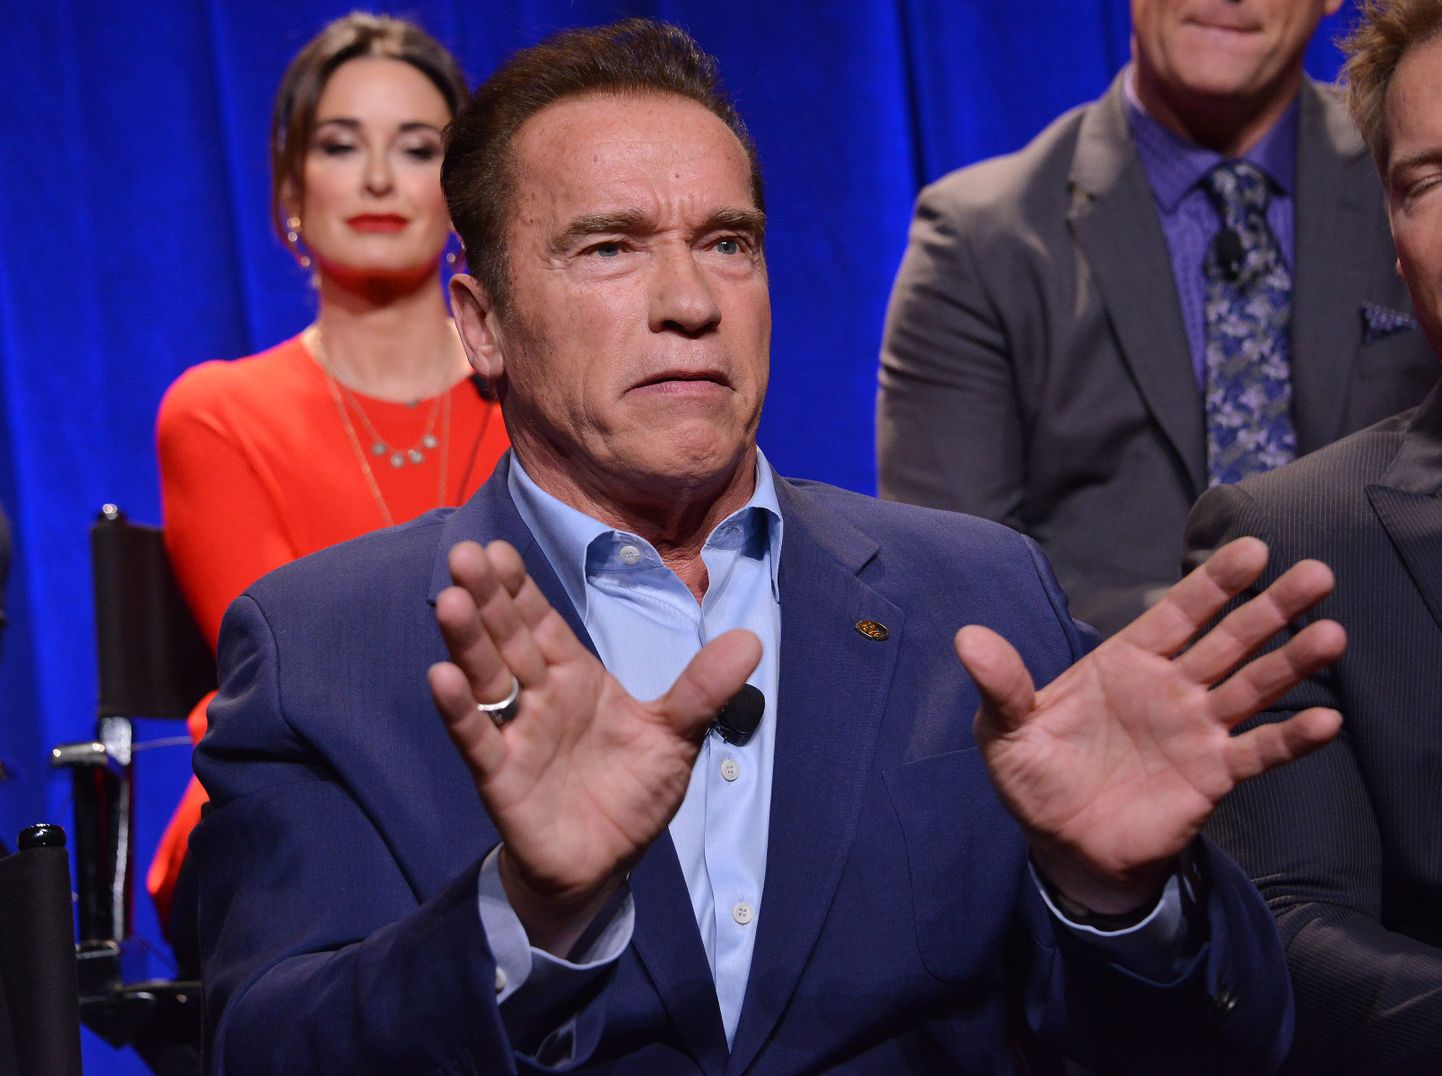 Arnold Schwarzenegger at "The New Celebrity Apprentice" Press Conference held at the Universal Studios Lot, Stage 17 in Universal City, CA on Friday, December 9, 2016. (Photo By Sthanlee B. Mirador) *** Please Use Credit from Credit Field ***